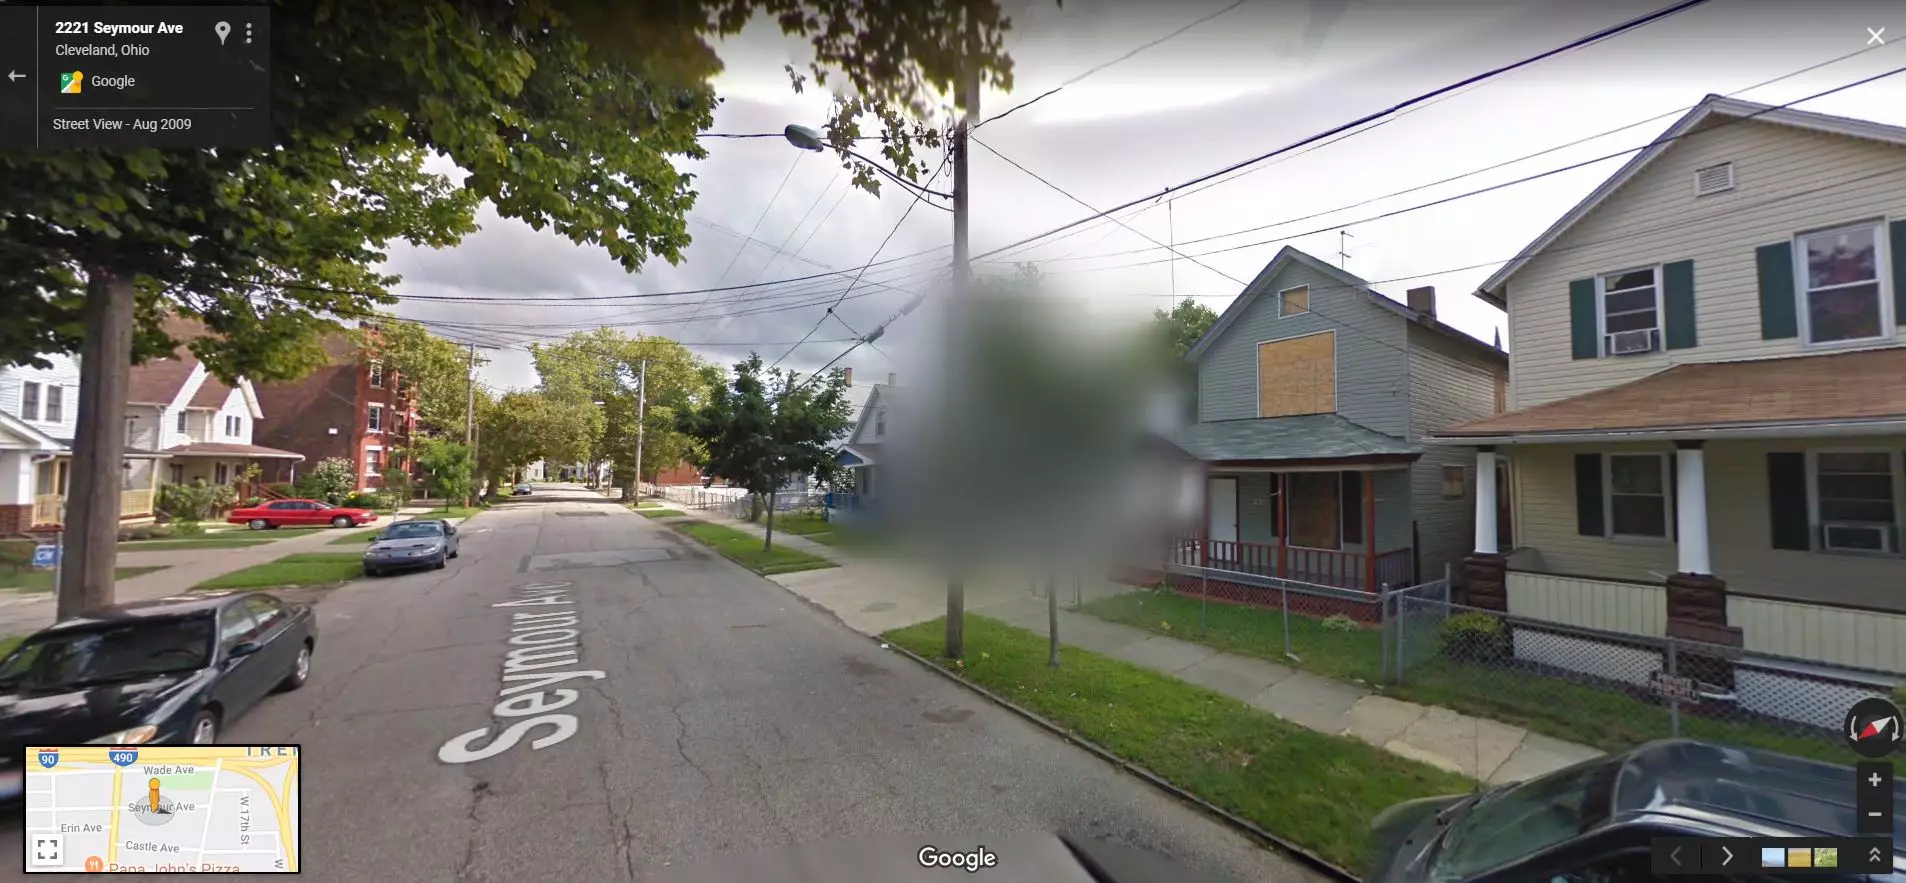 2207 Seymour Ave. has been blurred out on Google Street View.